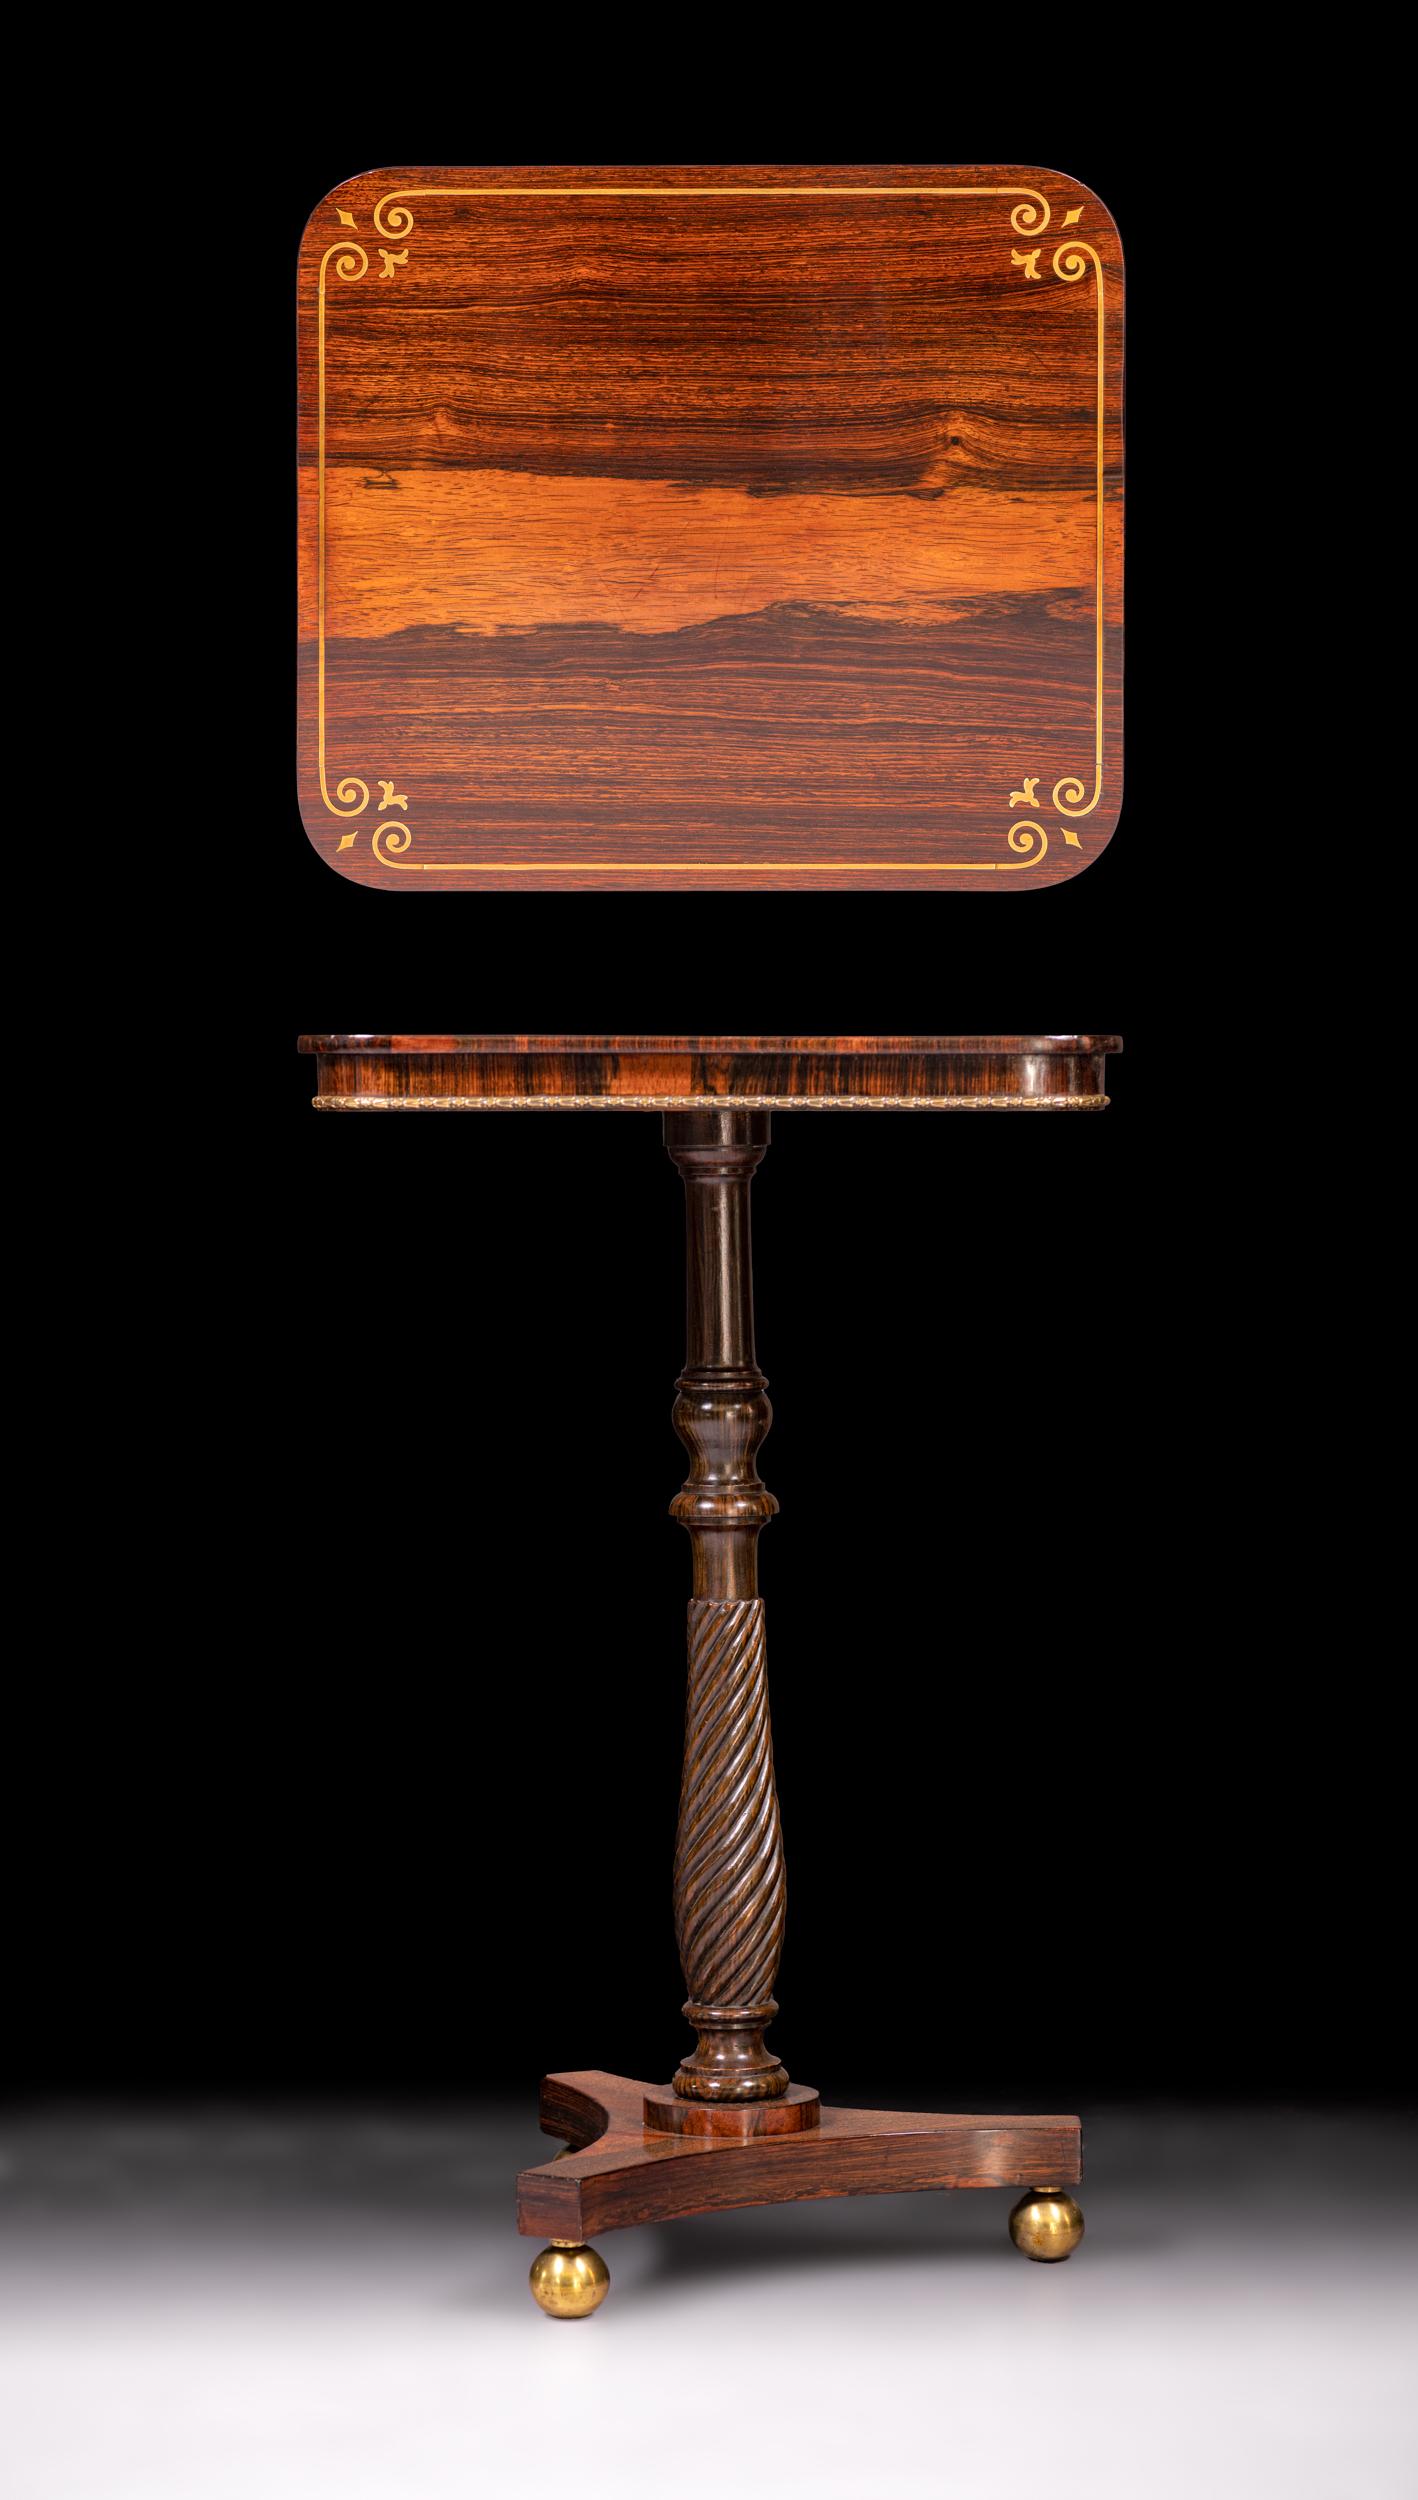 A Regency occasional table in goncalo alves, attributed to Marsh and Tatham, inlayed with decorative brass to the top and sides.

Circa 1820

English

Marsh & Tatham were celebrated as ‘Upholders’ to George, Prince of Wales (later George IV)